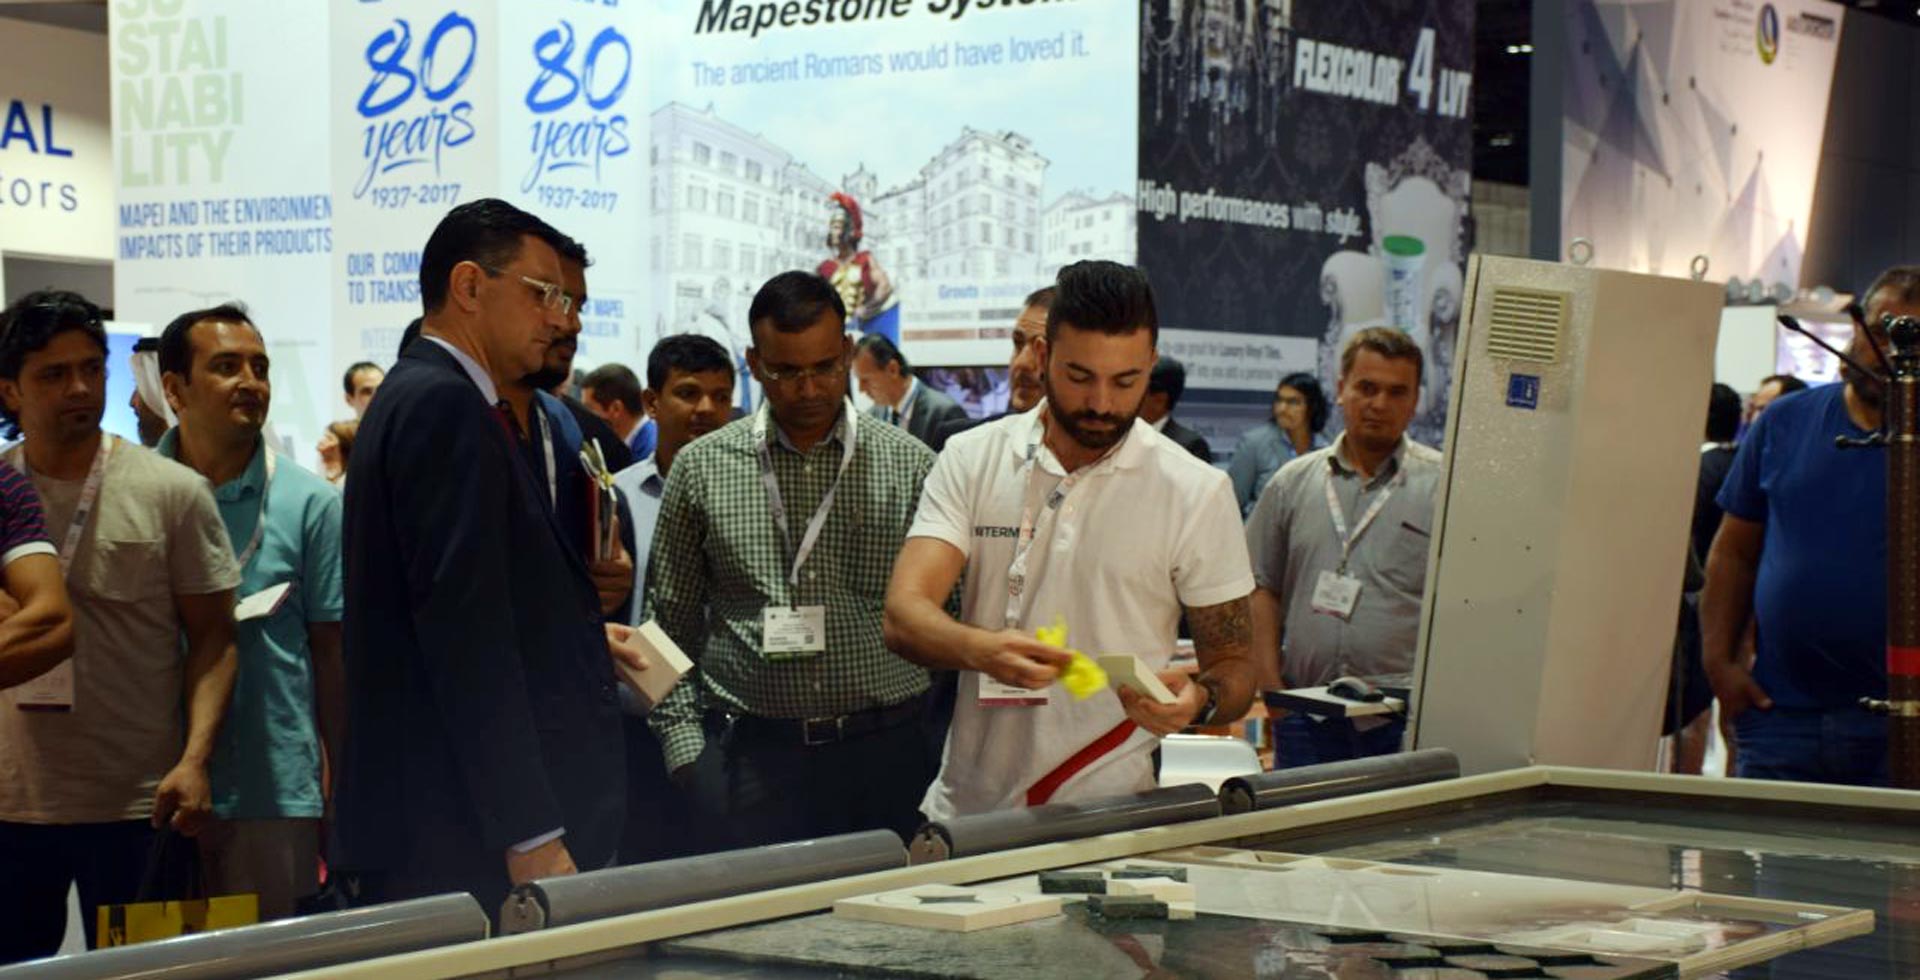 La tecnologia Waterjet in mostra a Middle East Stone